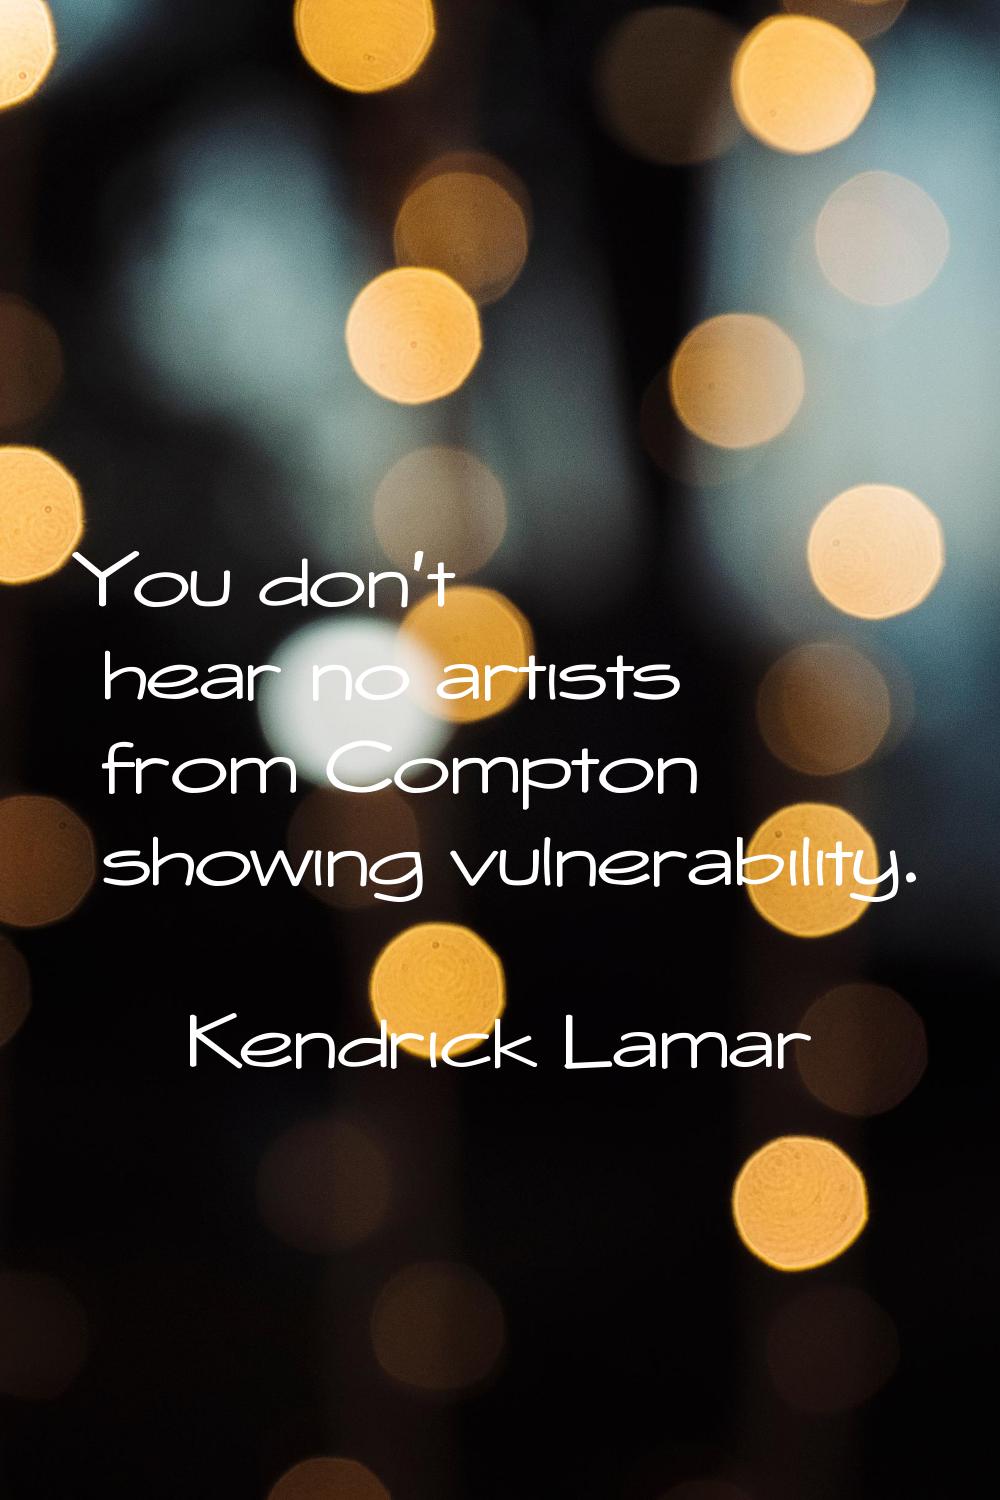 You don't hear no artists from Compton showing vulnerability.